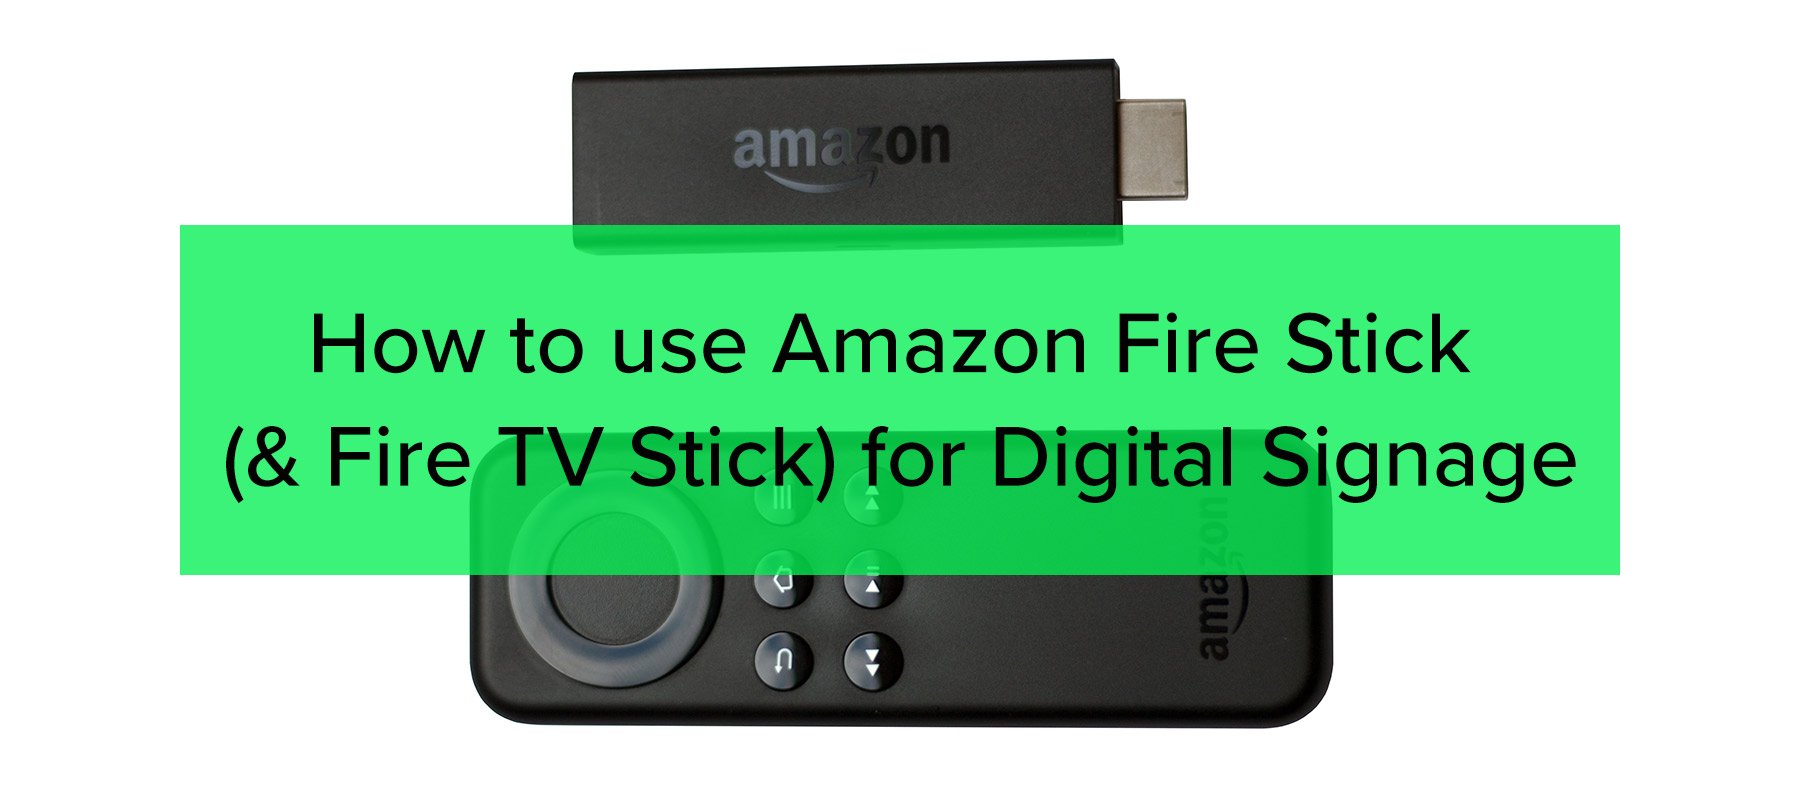 How to use Amazon Fire Stick (and Fire Stick TV) for Digital Signage